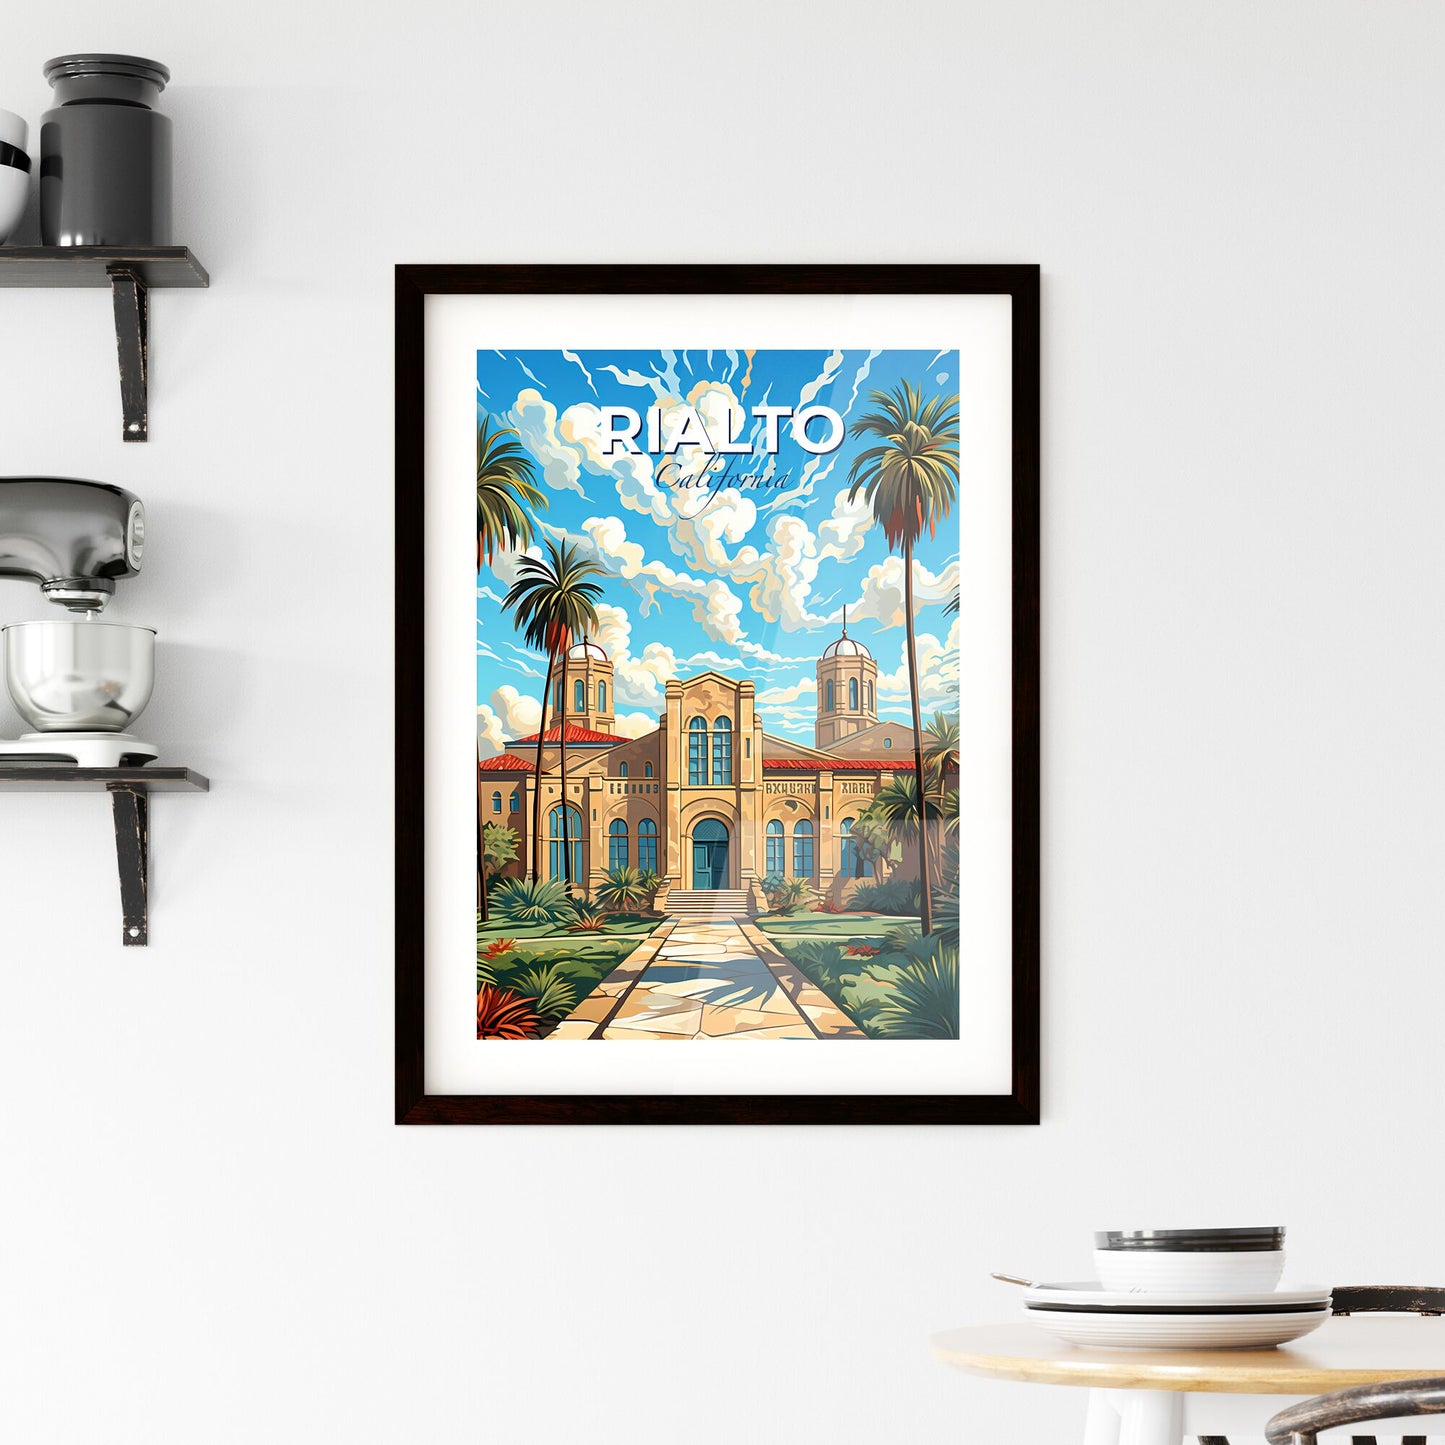 Rialto, California, A Poster of a painting of a building with palm trees Default Title